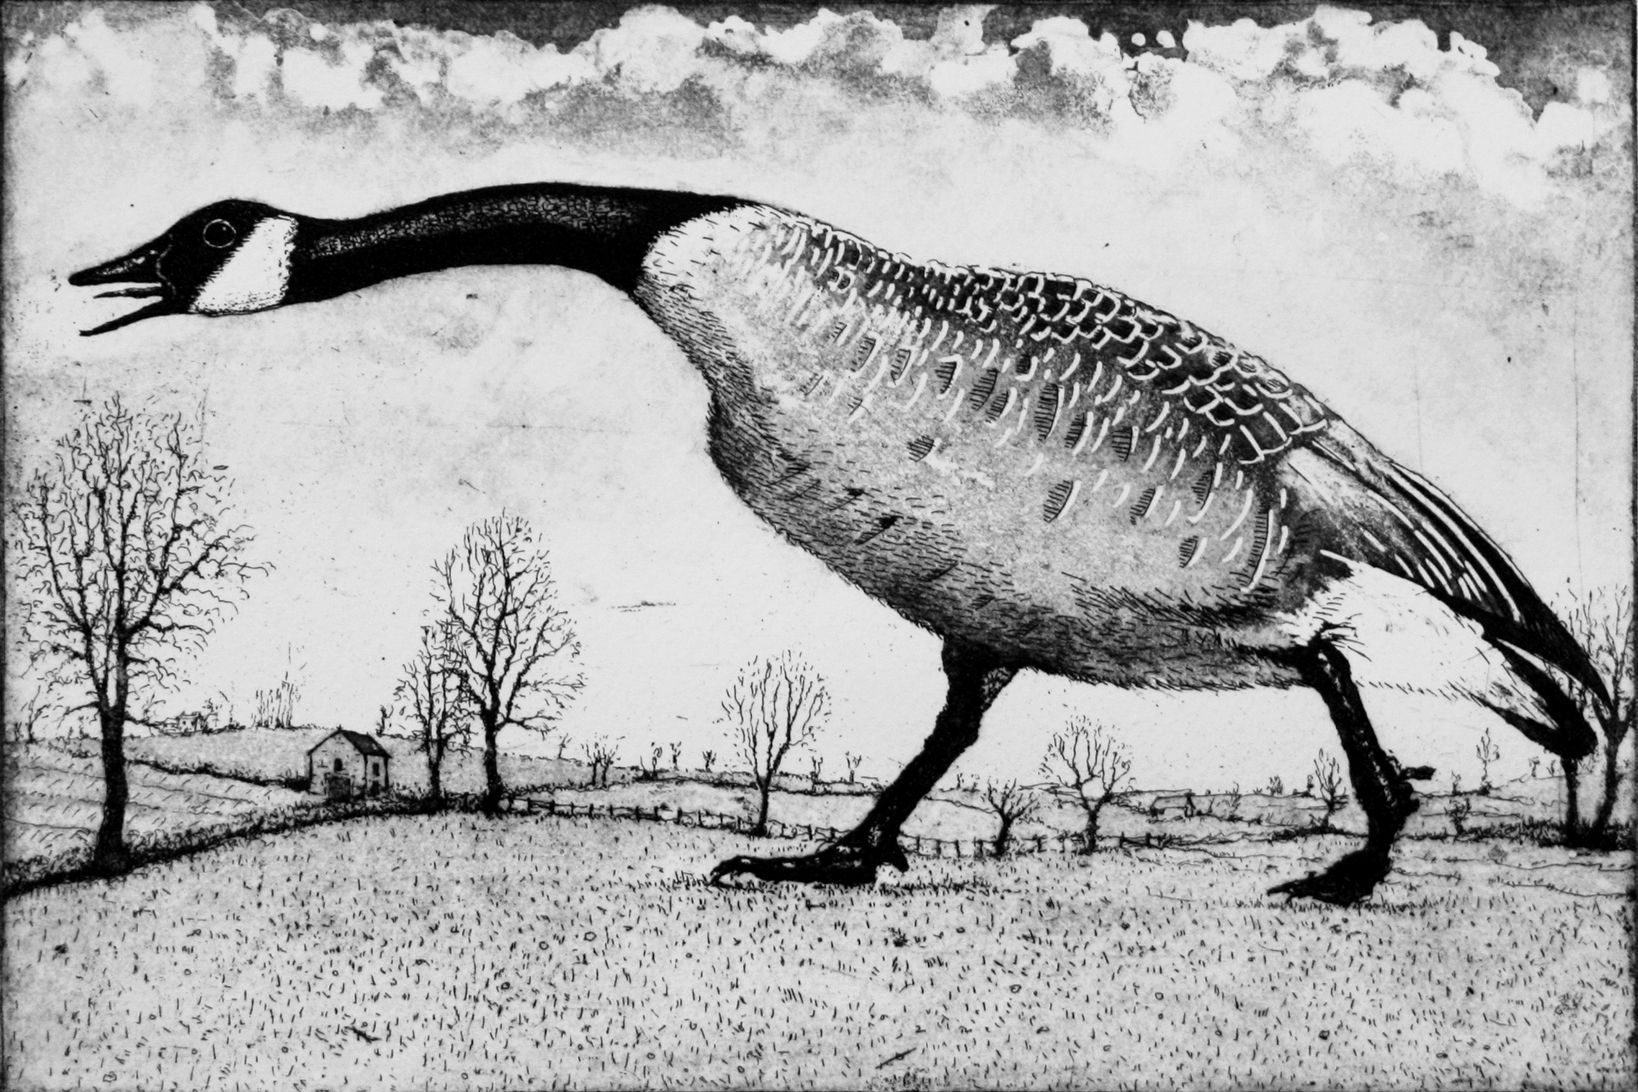 Hissing Goose by Tim Southall